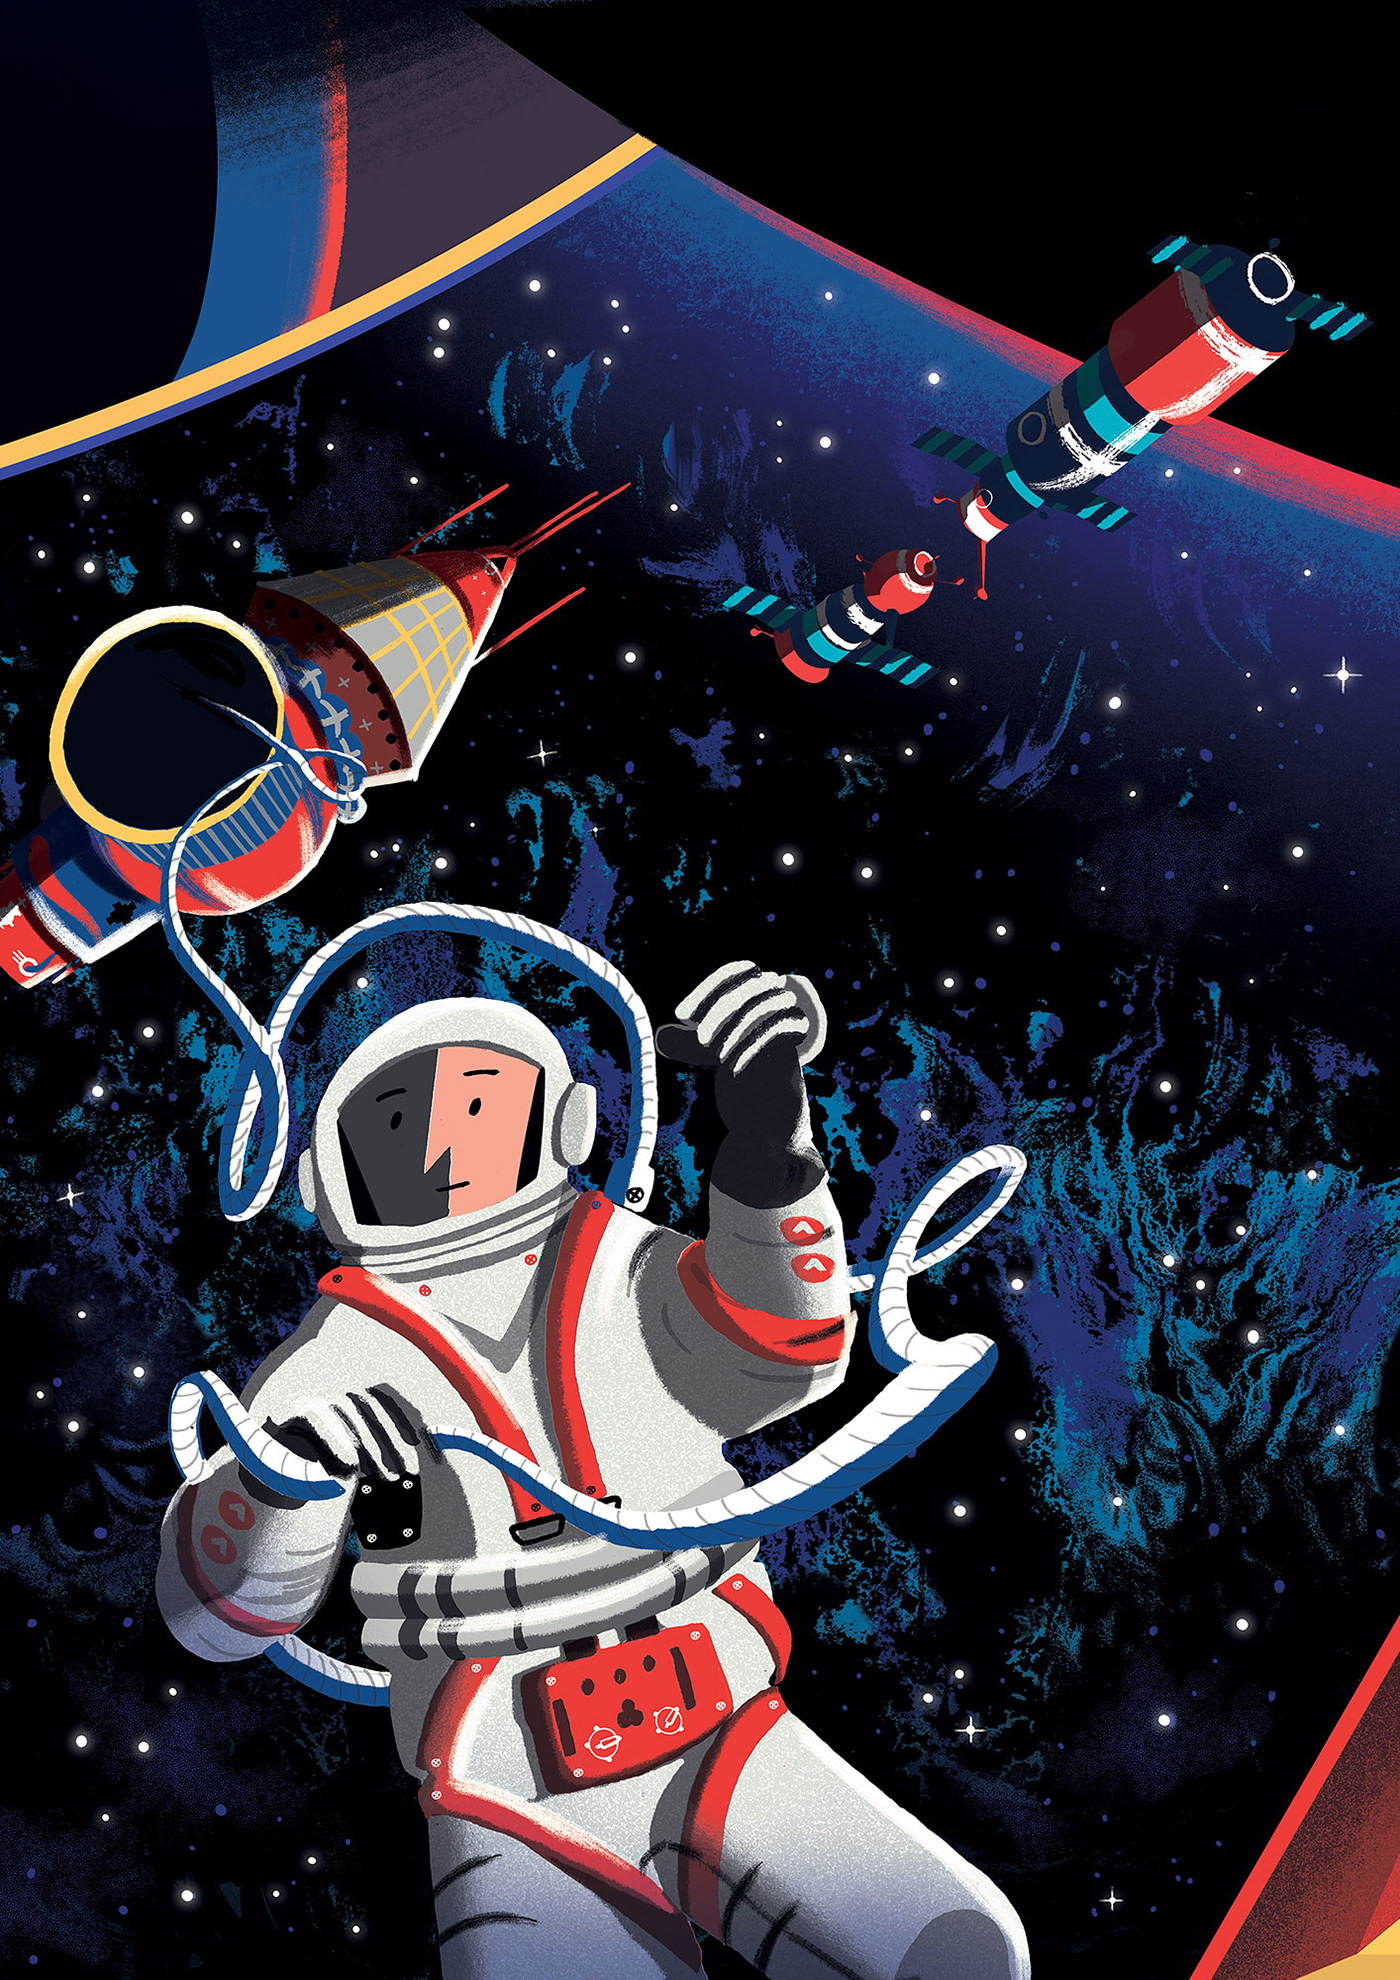 SPACE RACE nobrow concertina book publishing   picturebook ILLUSTRATION 